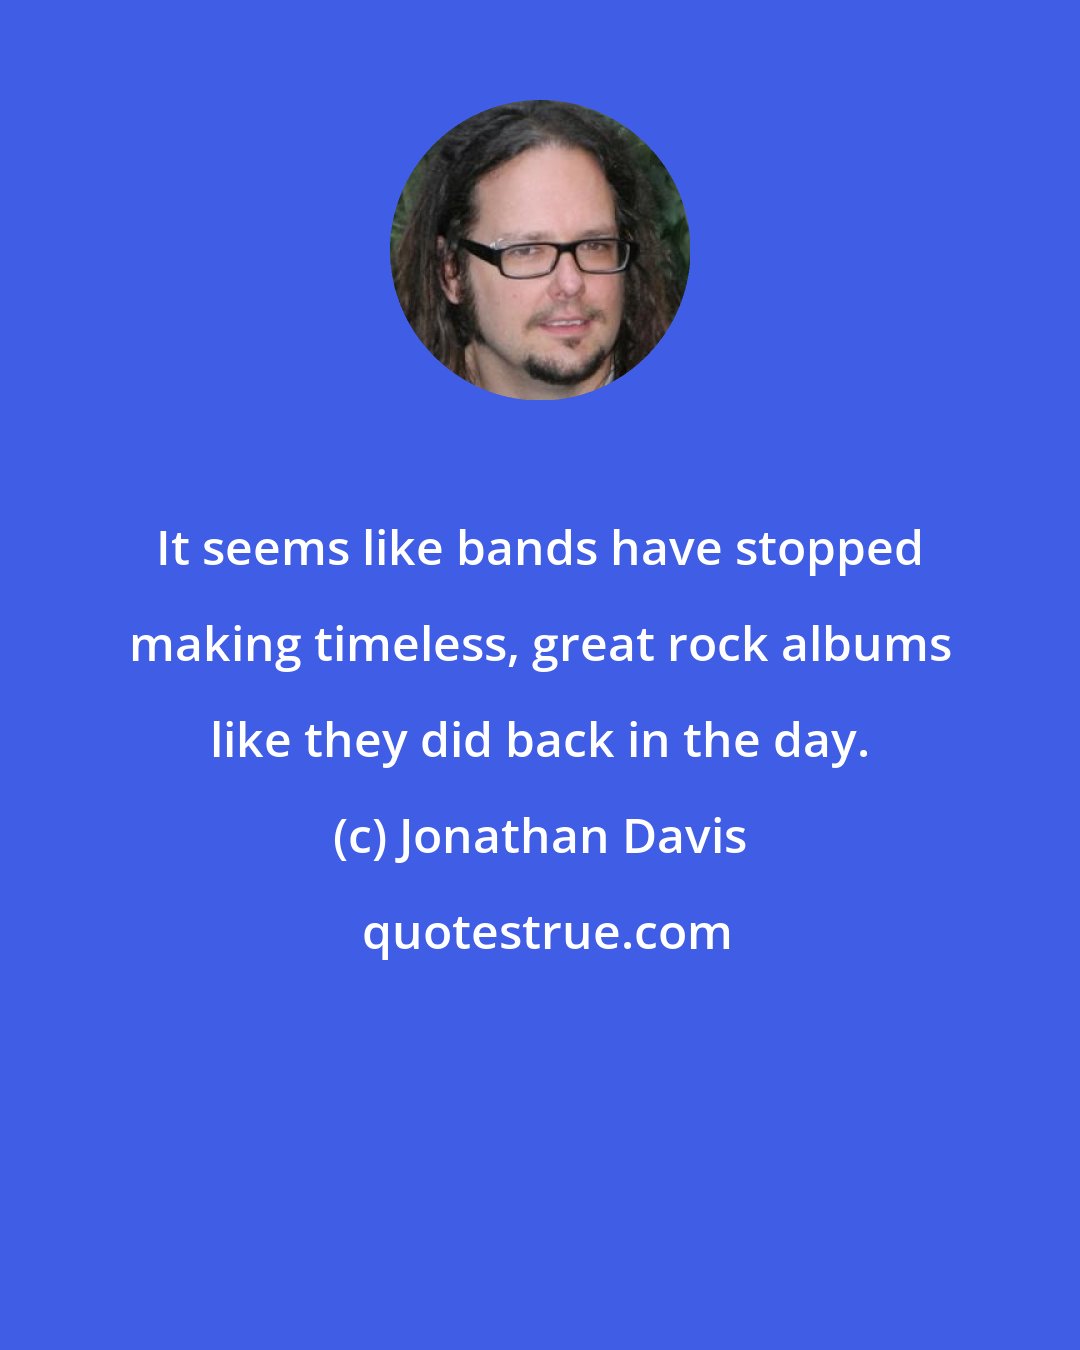 Jonathan Davis: It seems like bands have stopped making timeless, great rock albums like they did back in the day.